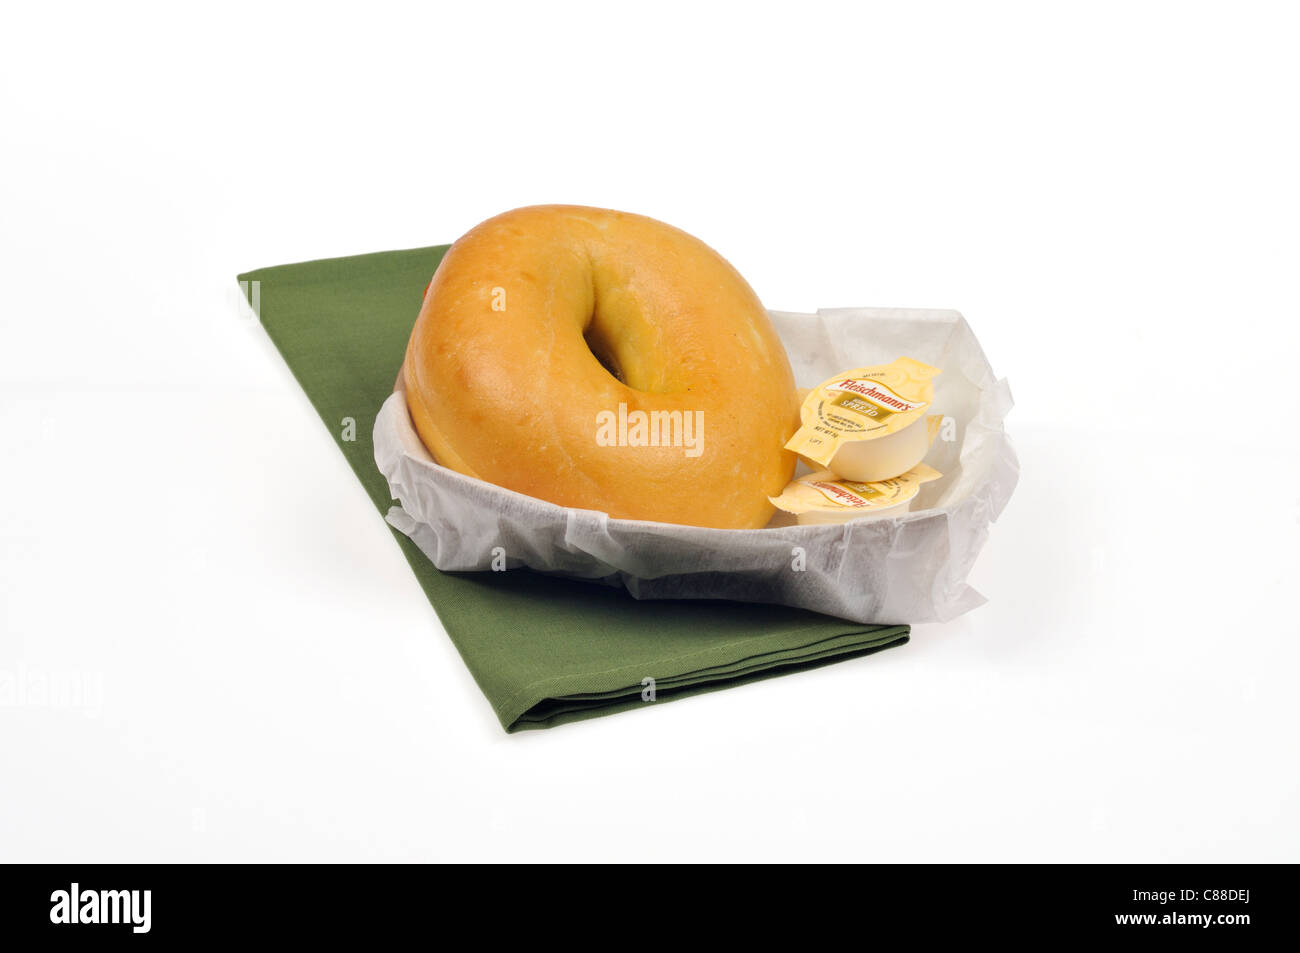 Plain bagel with 2 butter containers and knife in a paper basket on with green napkin on white background, cutout. Stock Photo